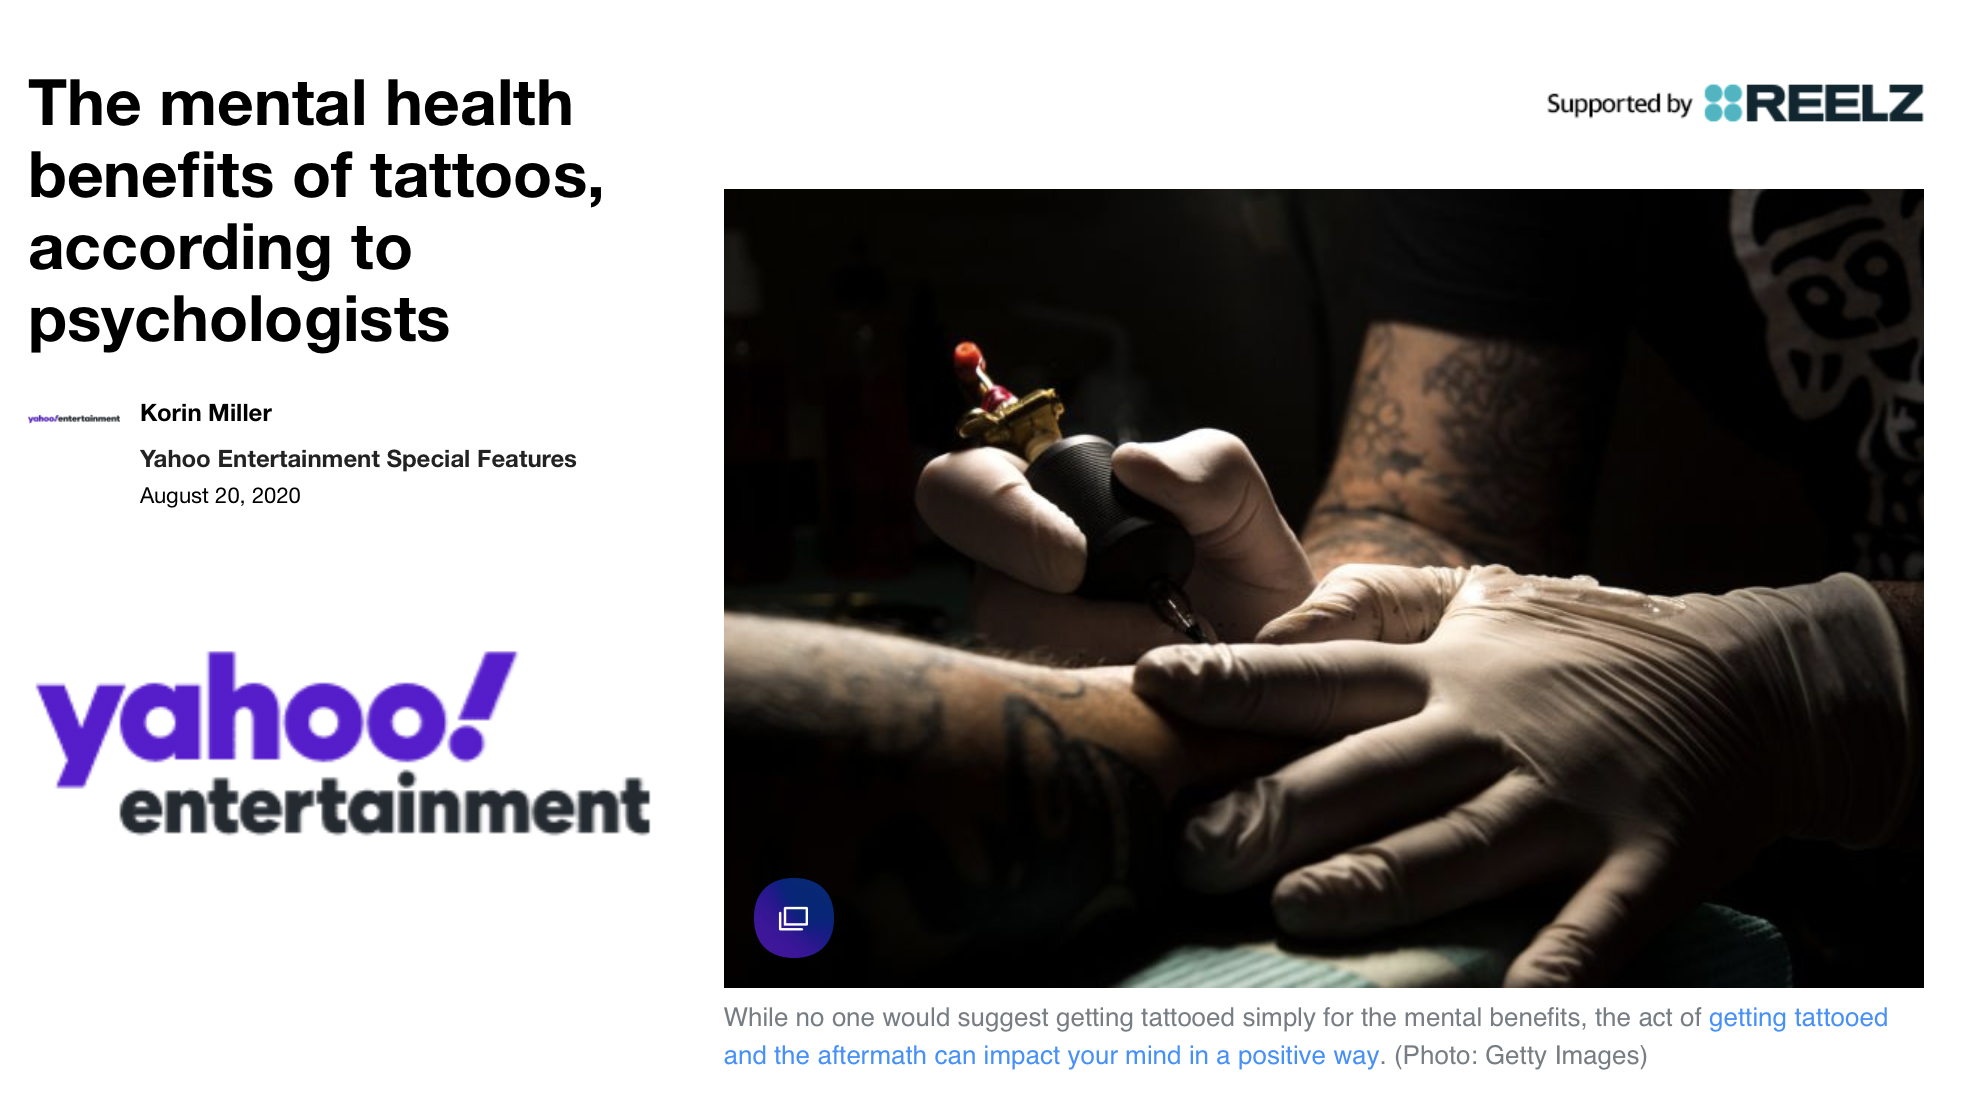 The mental health benefits of tattoos, according to psychologists" , by Korin Miller, Yahoo Entertainment Special Features, August 20, 2020 - -